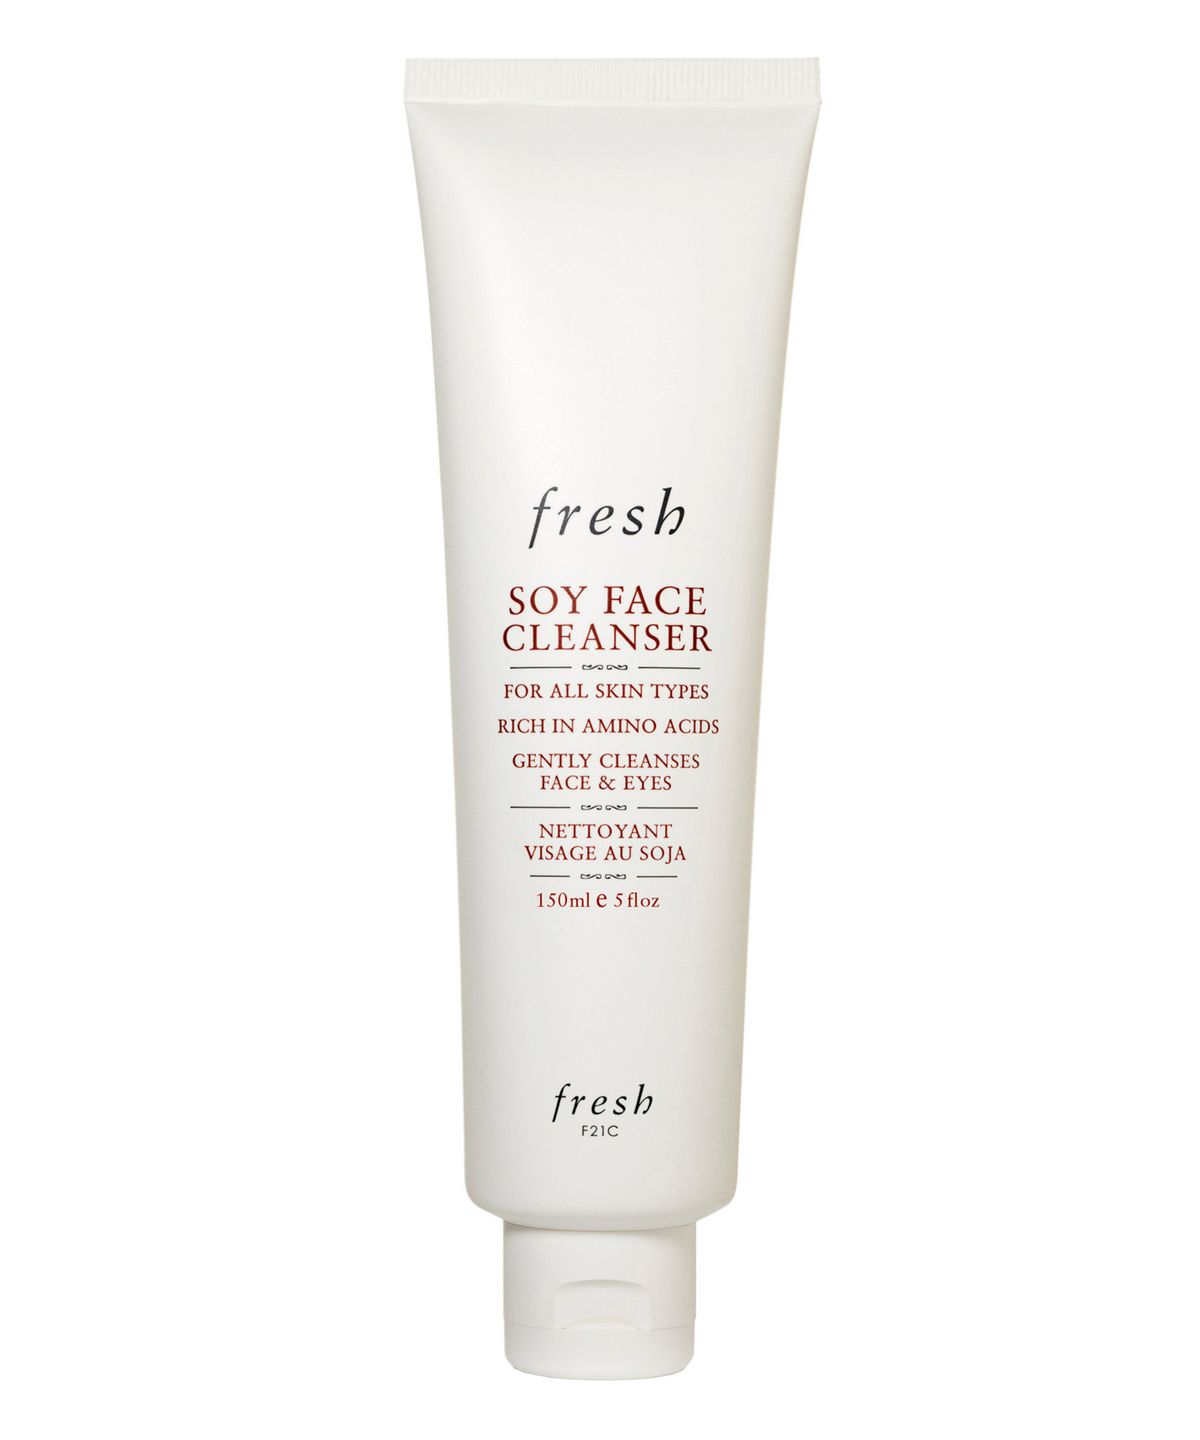 Soy Makeup Removing Cleanser by Fresh in UAE at Shopey